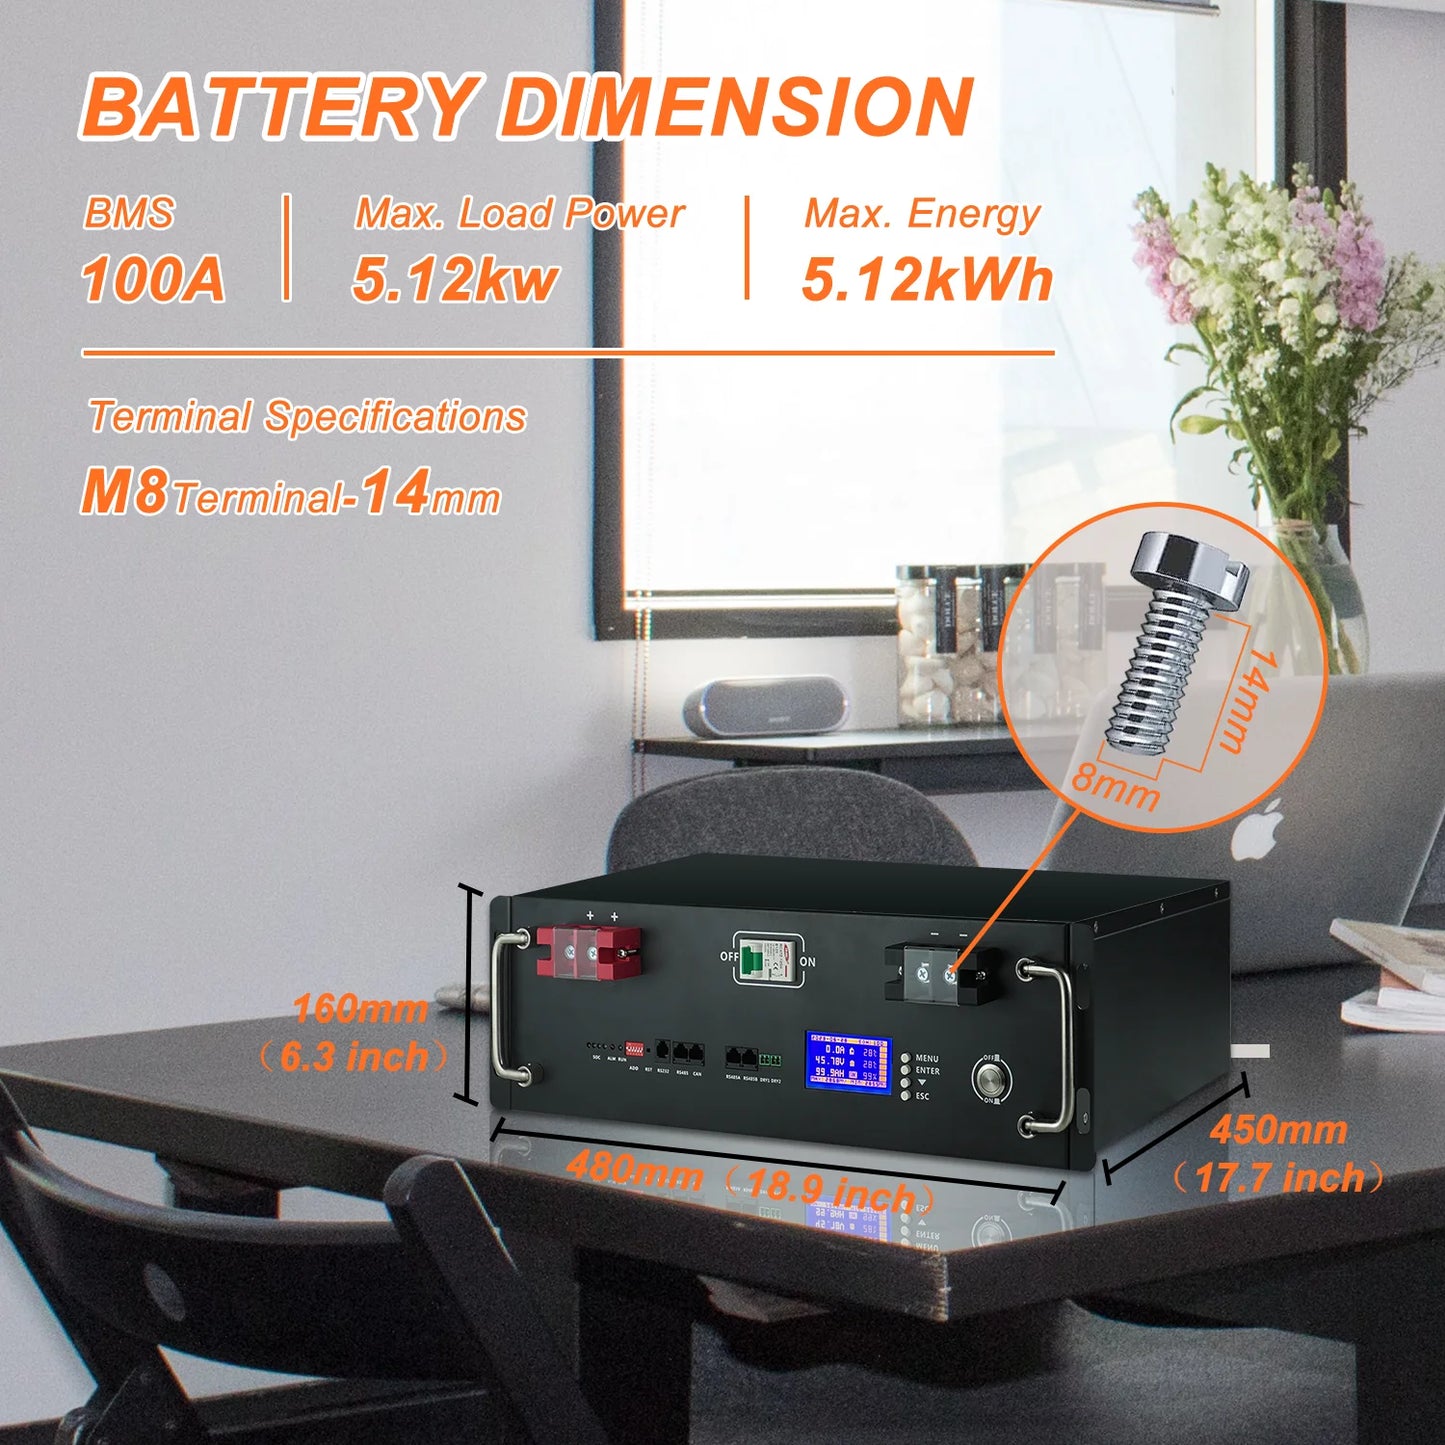 New 48V 100Ah LiFePo4 Battery Pack 51.2V 5kw Lithium Iron Phosphate Batteries 16S 100A Built-in BMS 48V 50AH 200AH Pack No Tax